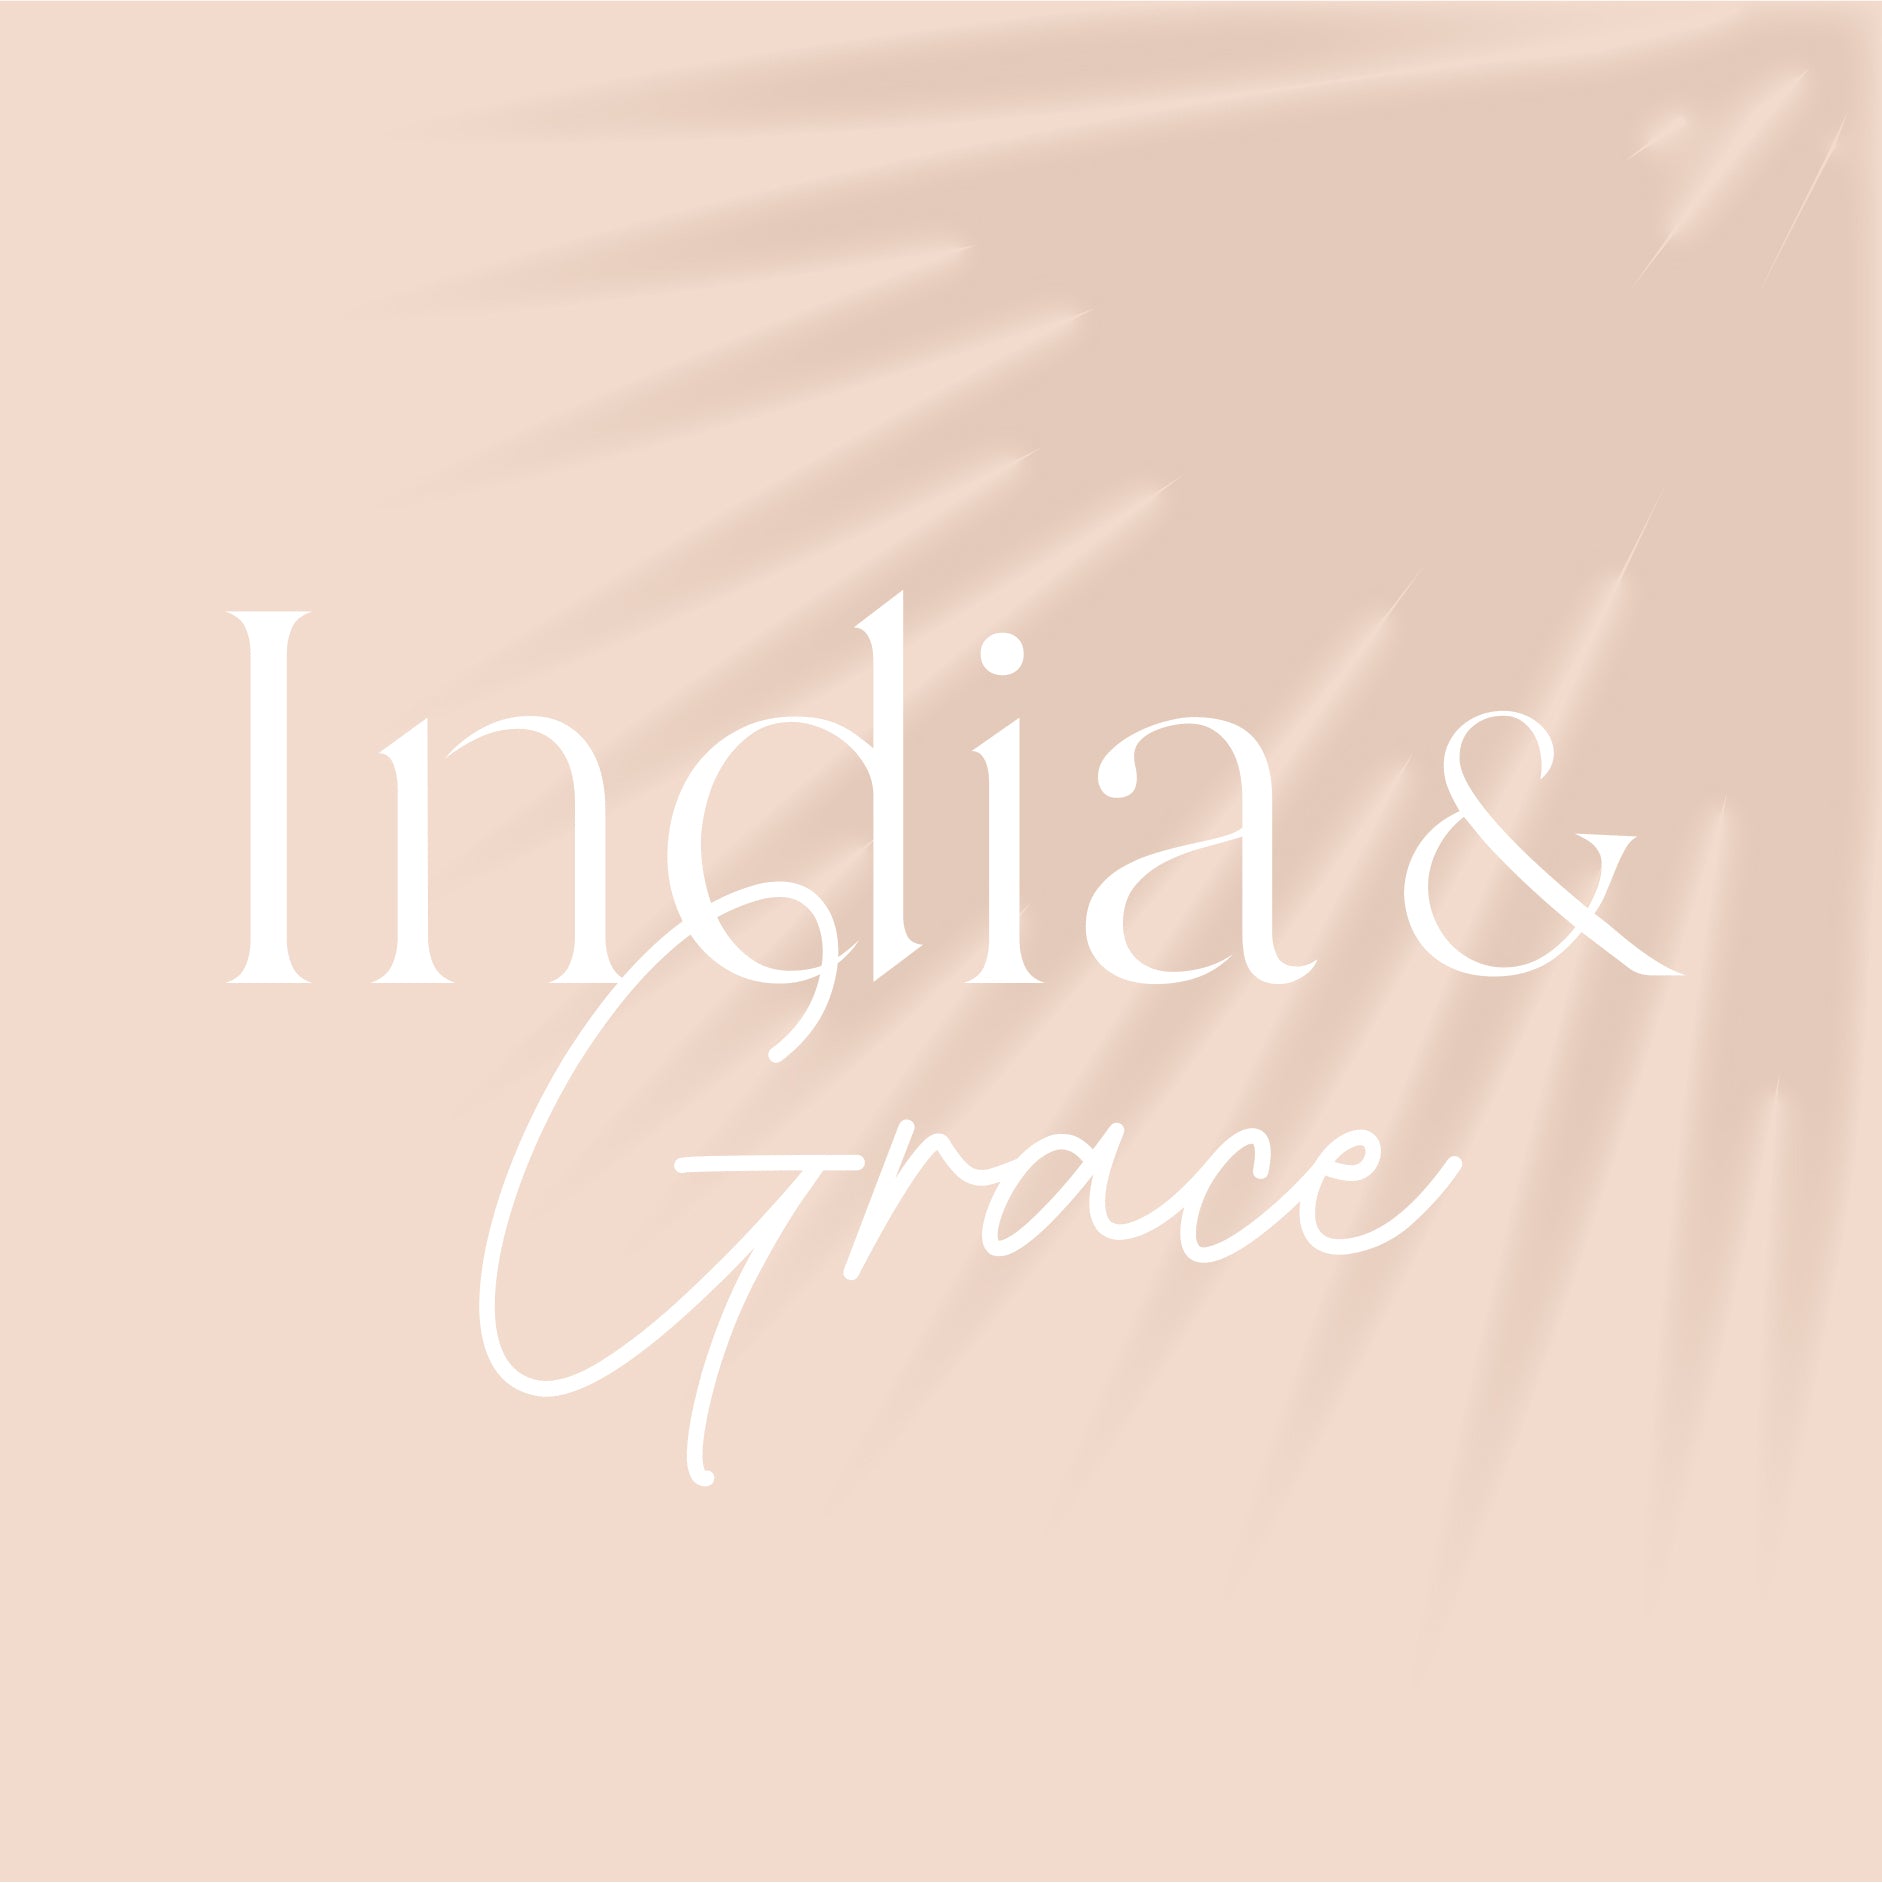 India and Grace